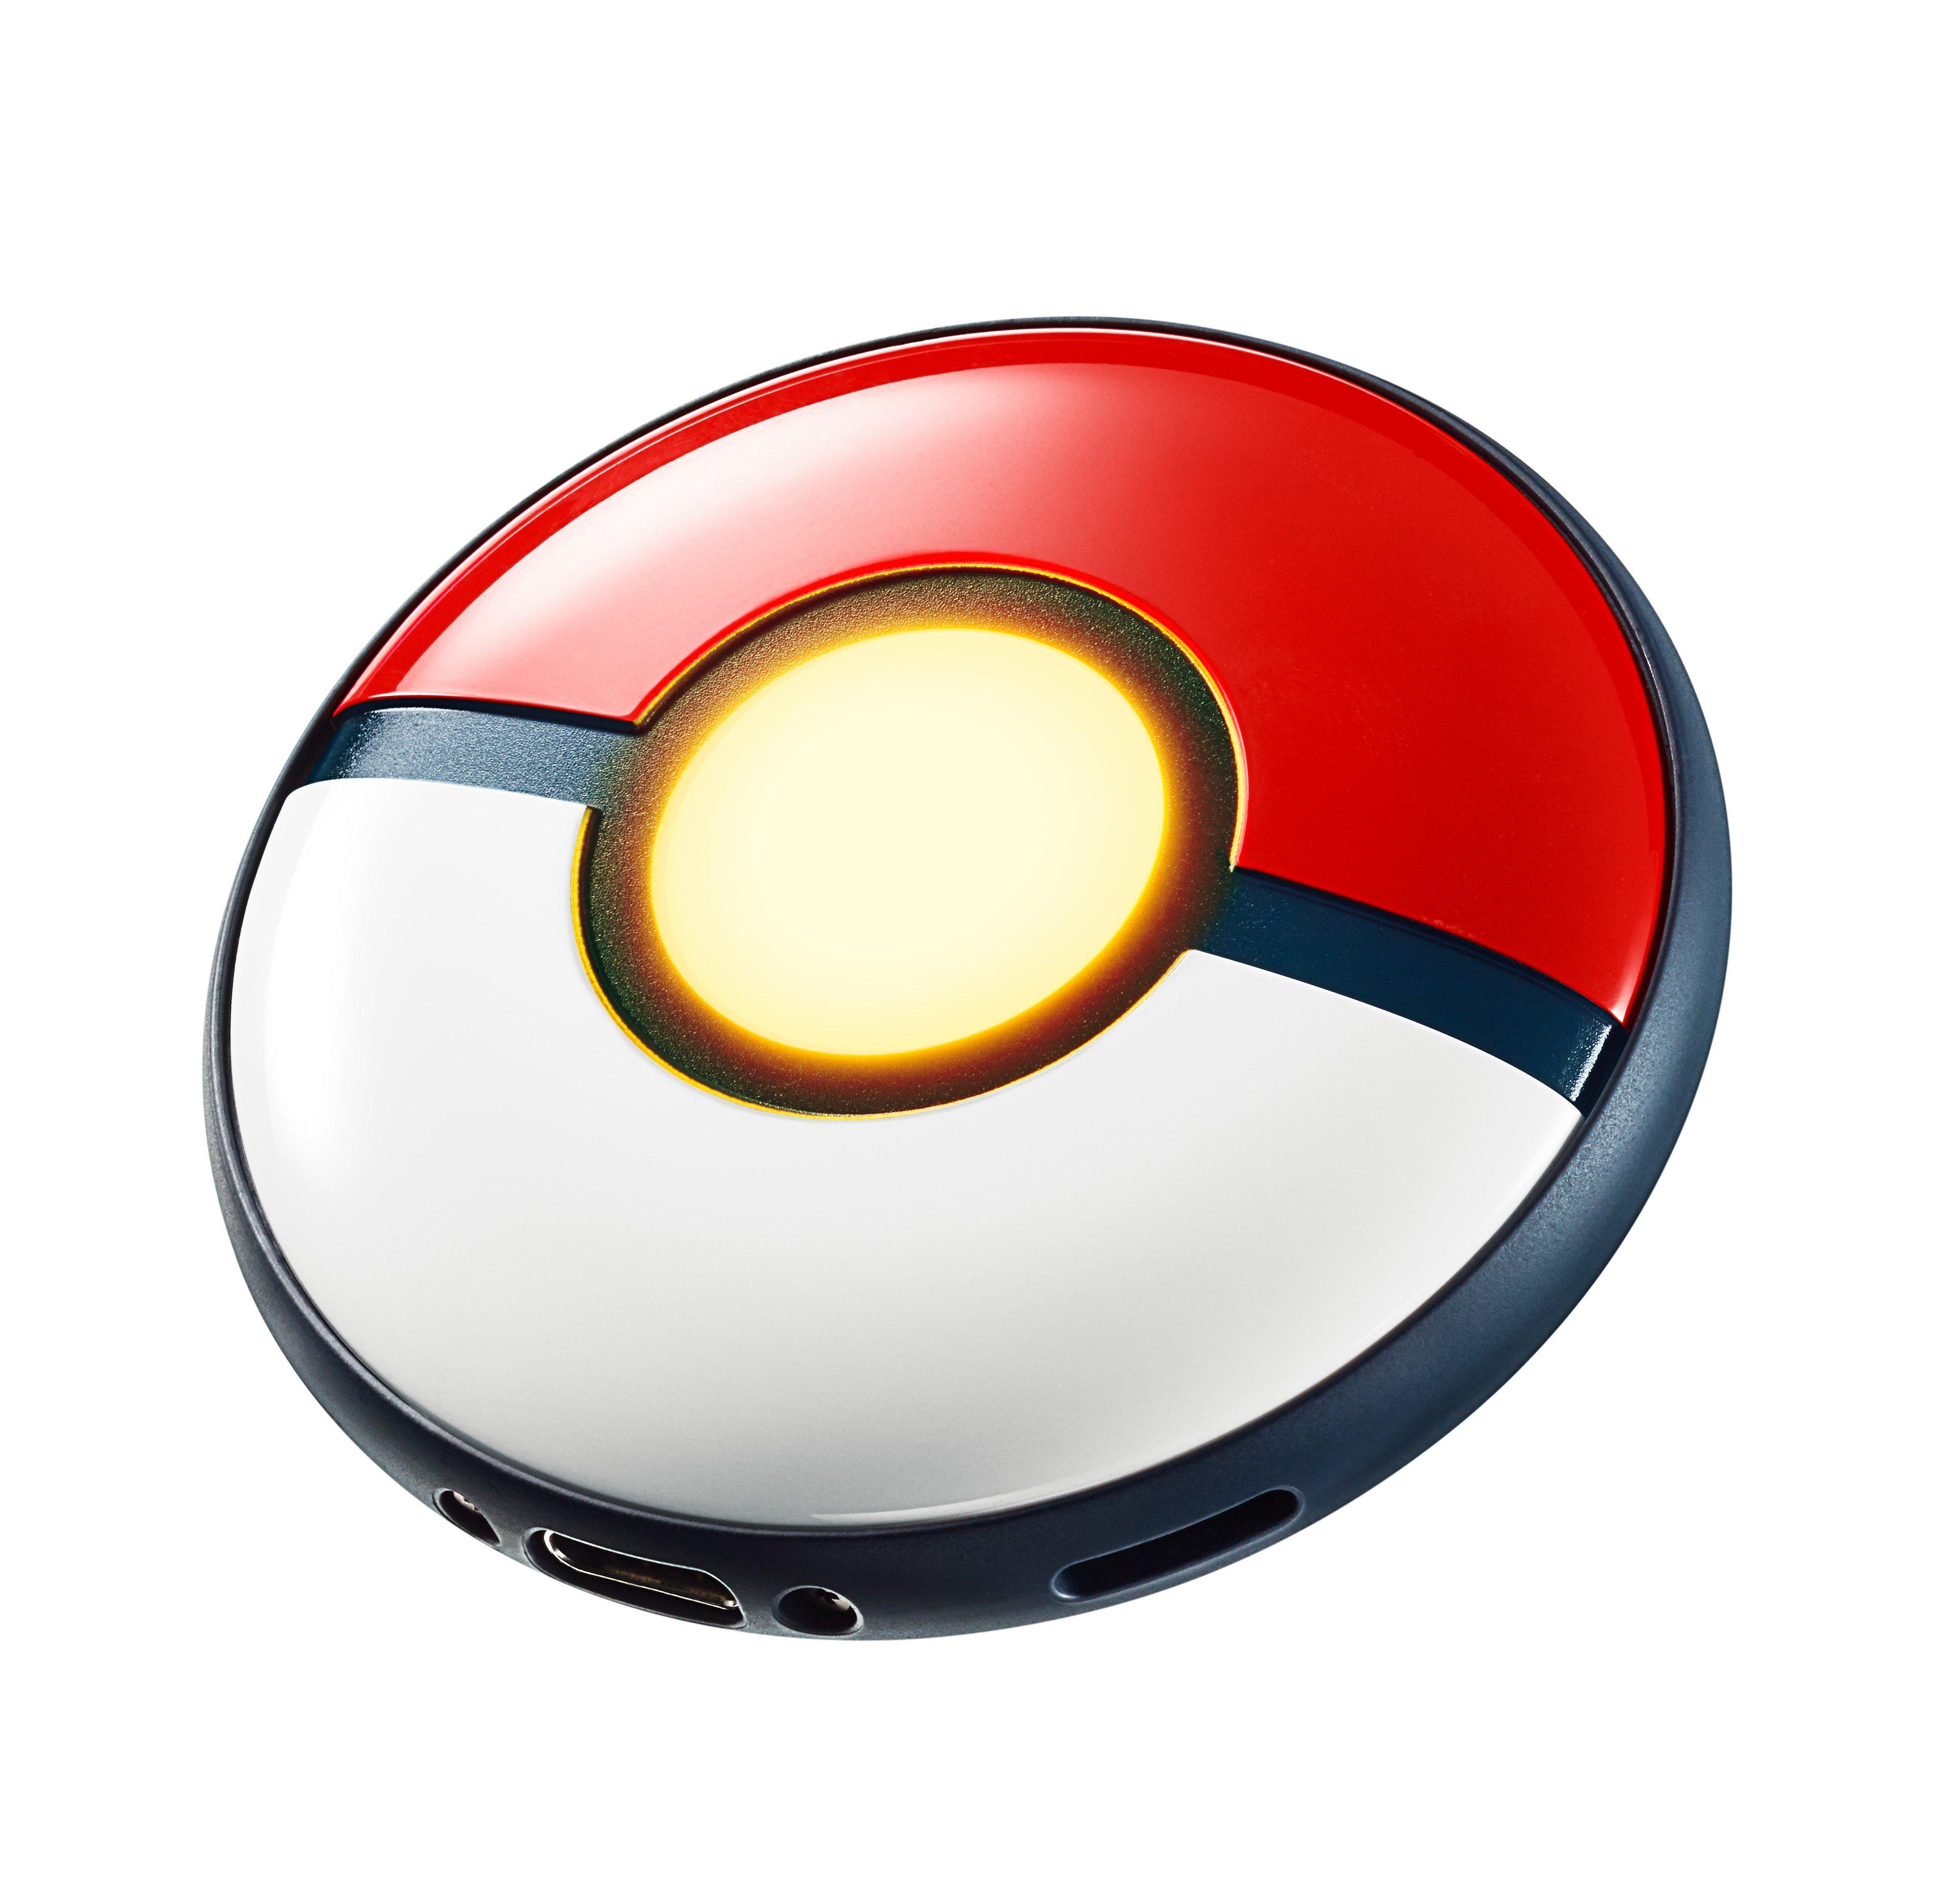 Living Pokédex Tracker 3.0 now supports more games